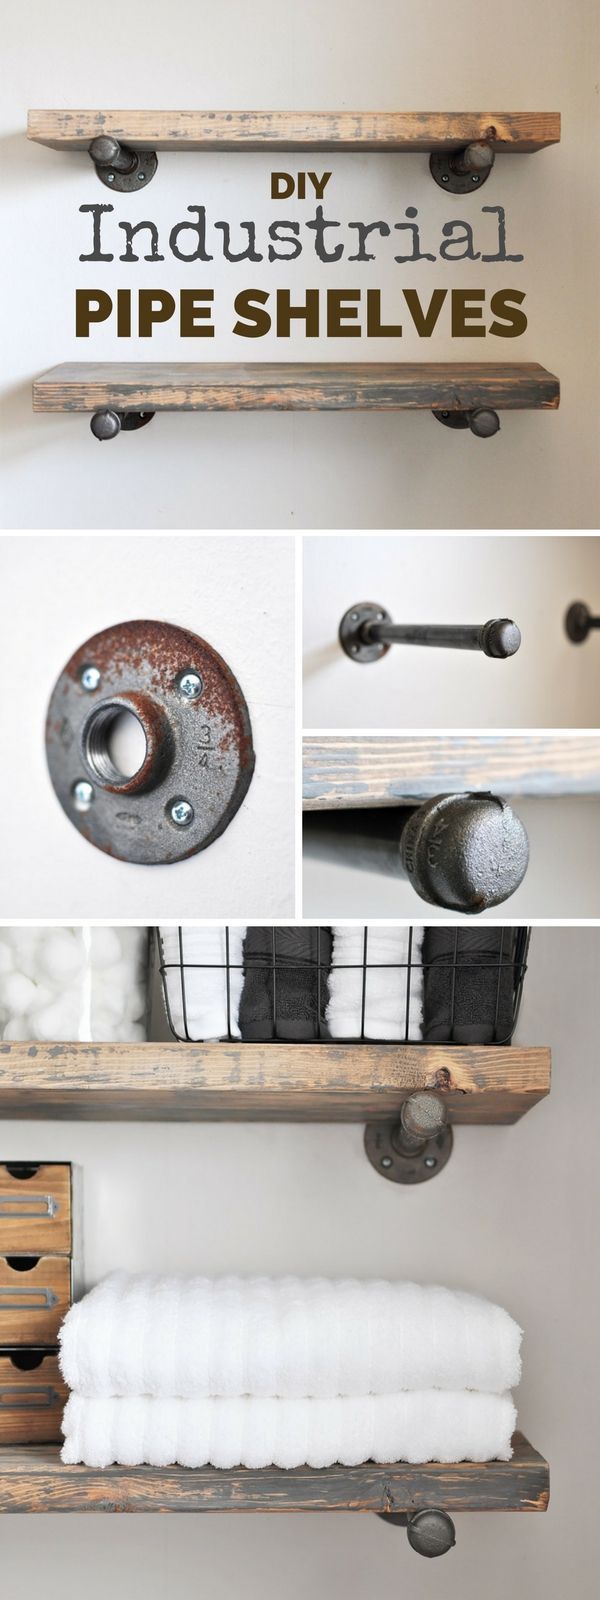 Check out the tutorial: #DIY Industrial Pipe Shelves @istandarddesign